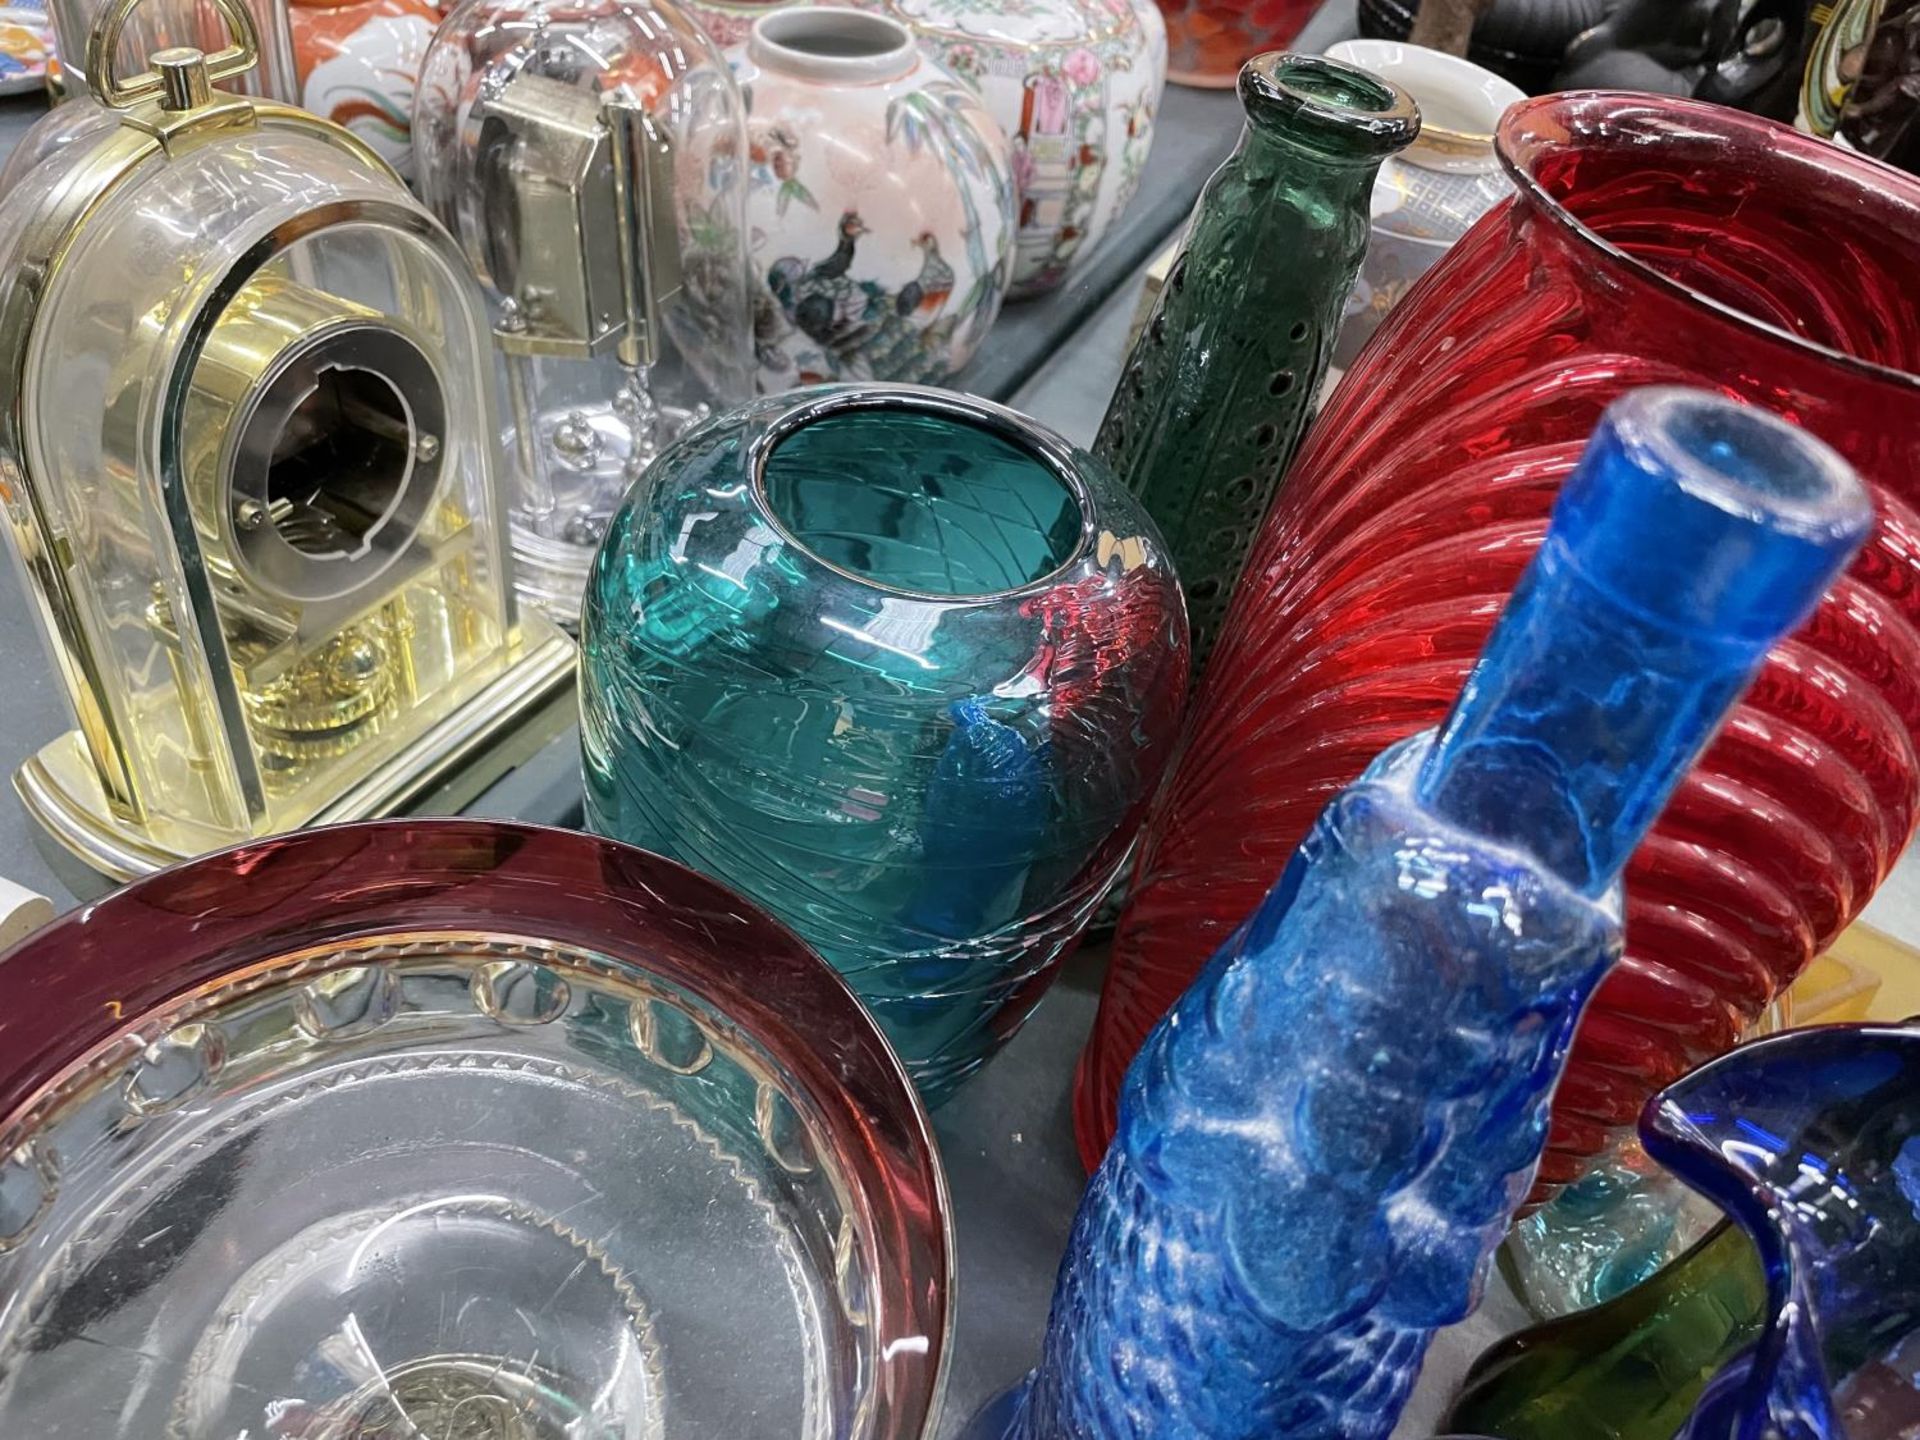 A LARGE QUANTITY OF COLOURED GLASSWARE TO INCLUDE VASES, BOWLS, JUGS, ETC - Image 9 of 9